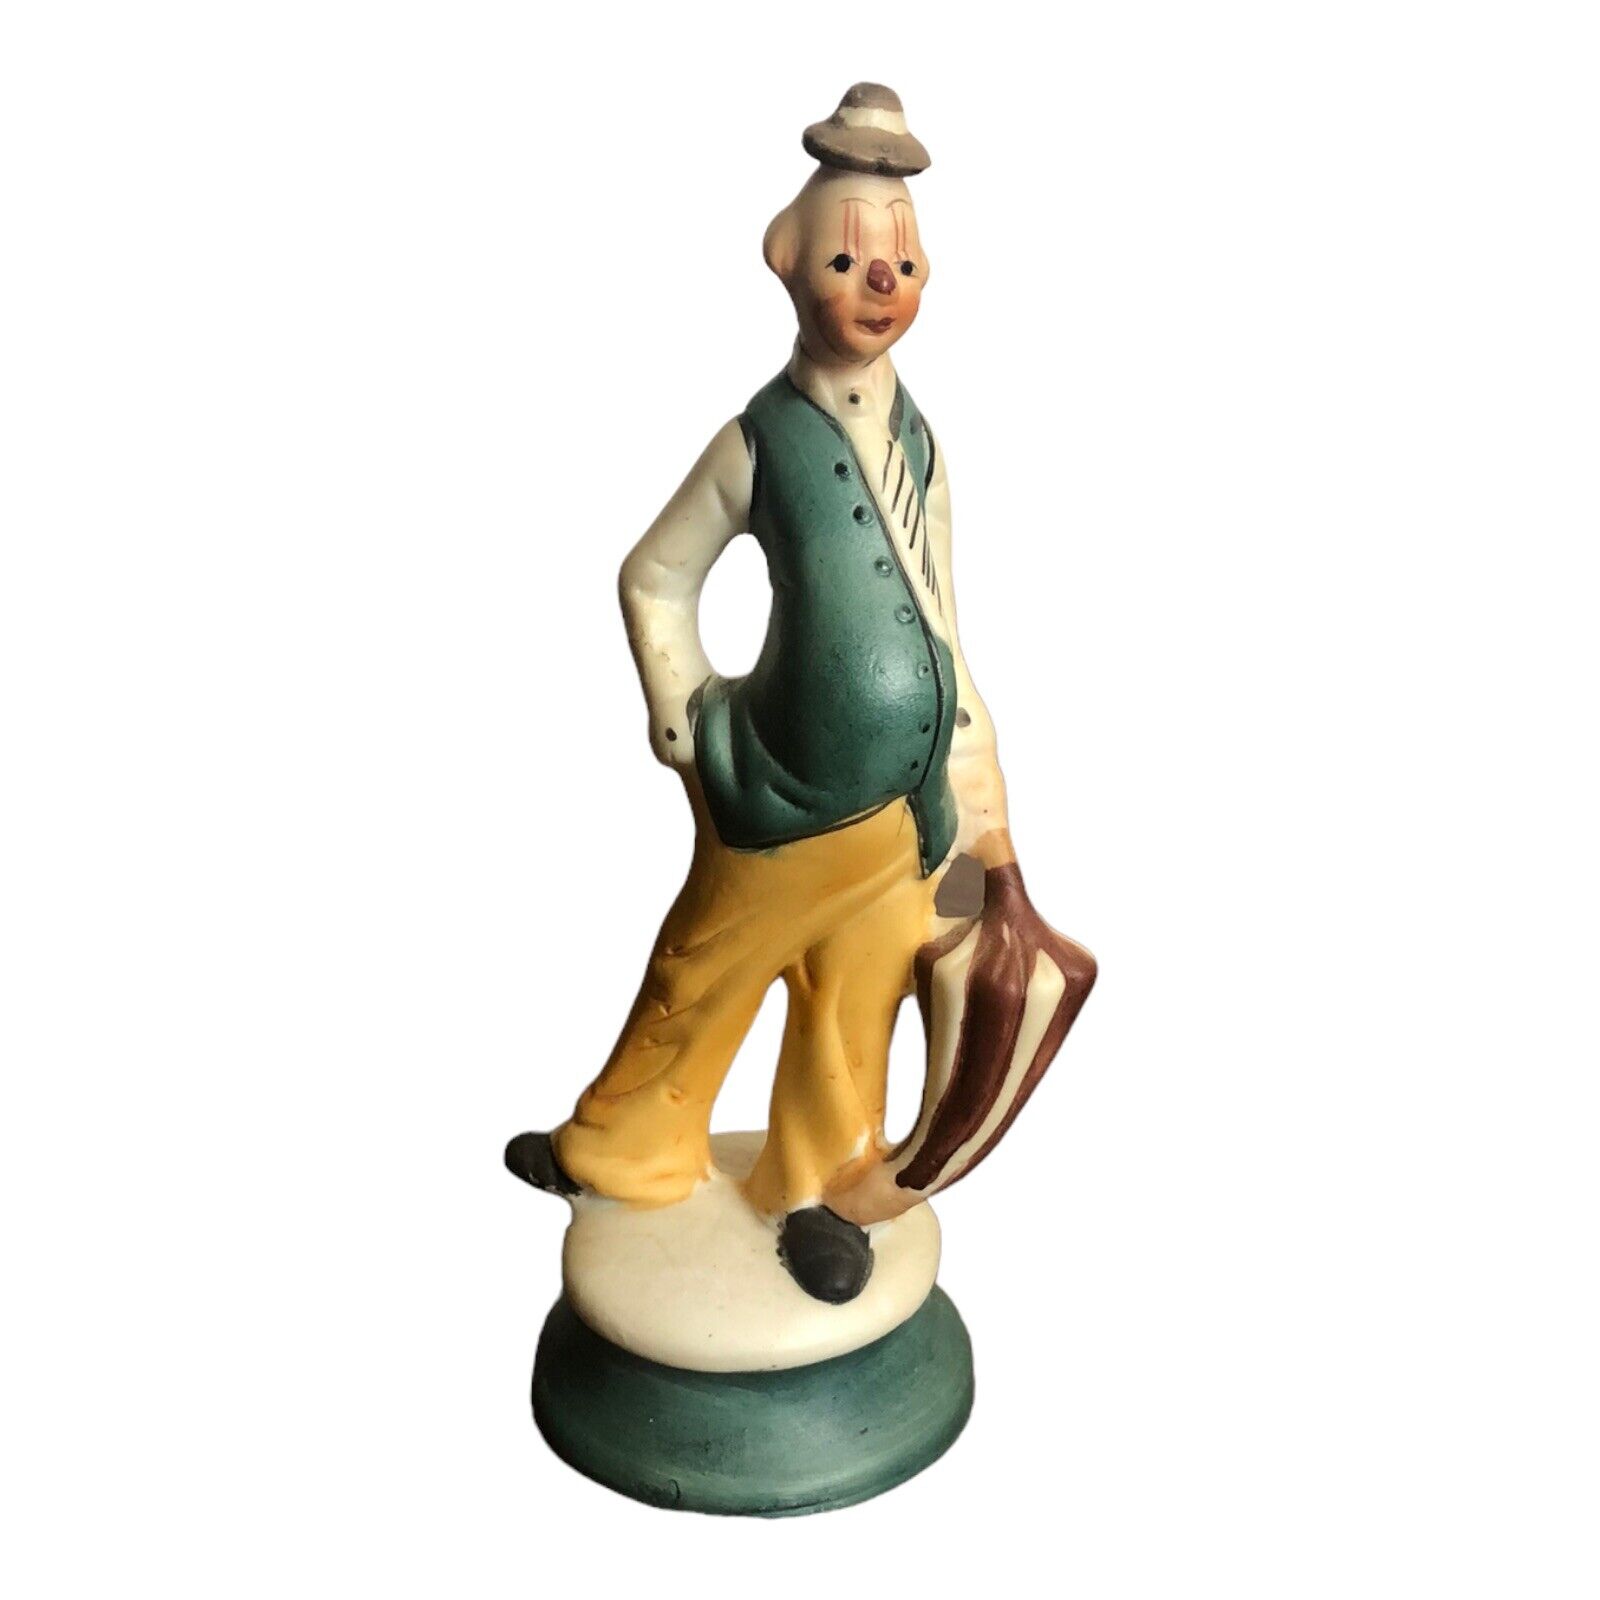 Hobo Clown Figurine Ceramic Vintage Made In Taiwan Green Vest With An Umbrella